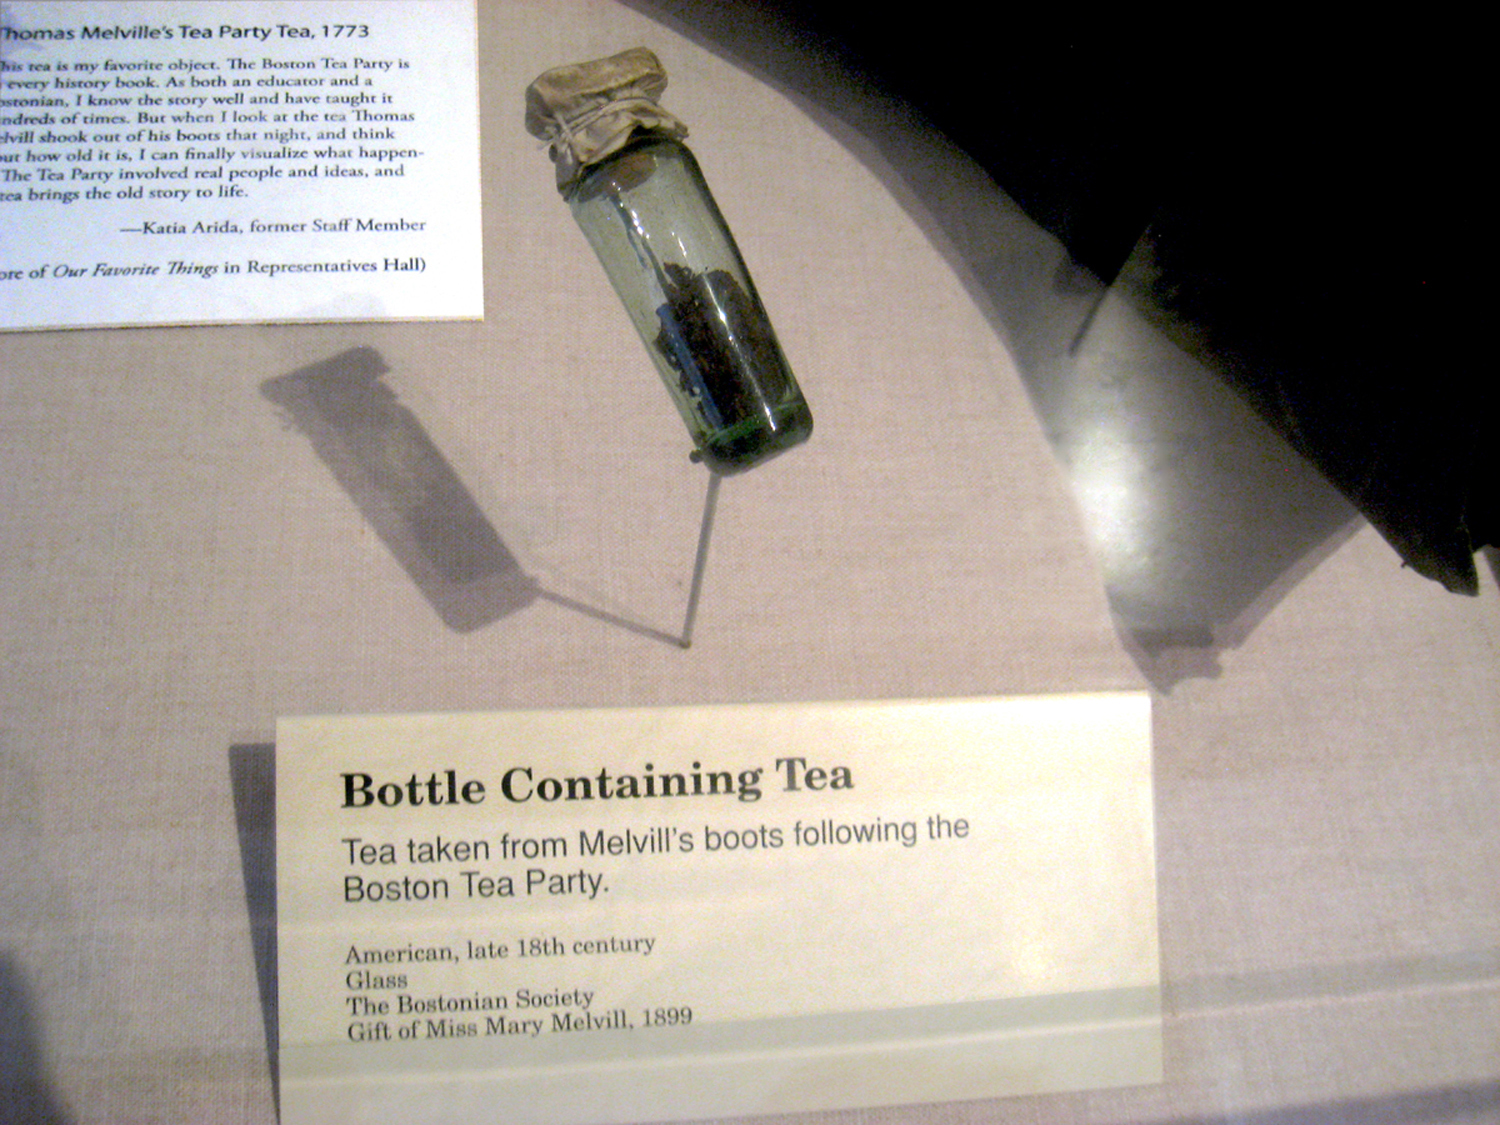 Bottle containing the tea Thomas Melvill found in his boots after the Boston Tea Party in 1773. The Tea Party participants went to great lengths to ensure no one kept any of the precious tea. When Melvill returned to his home he discovered there were tea leaves in his boots, and so he placed the leaves in a vial and surreptitiously held them for the remainder of his life. Handed down in the Melvill family, the leaves were donated to Boston's Old State House Museum in 1899 by a descendent, Miss Mary Melvill.